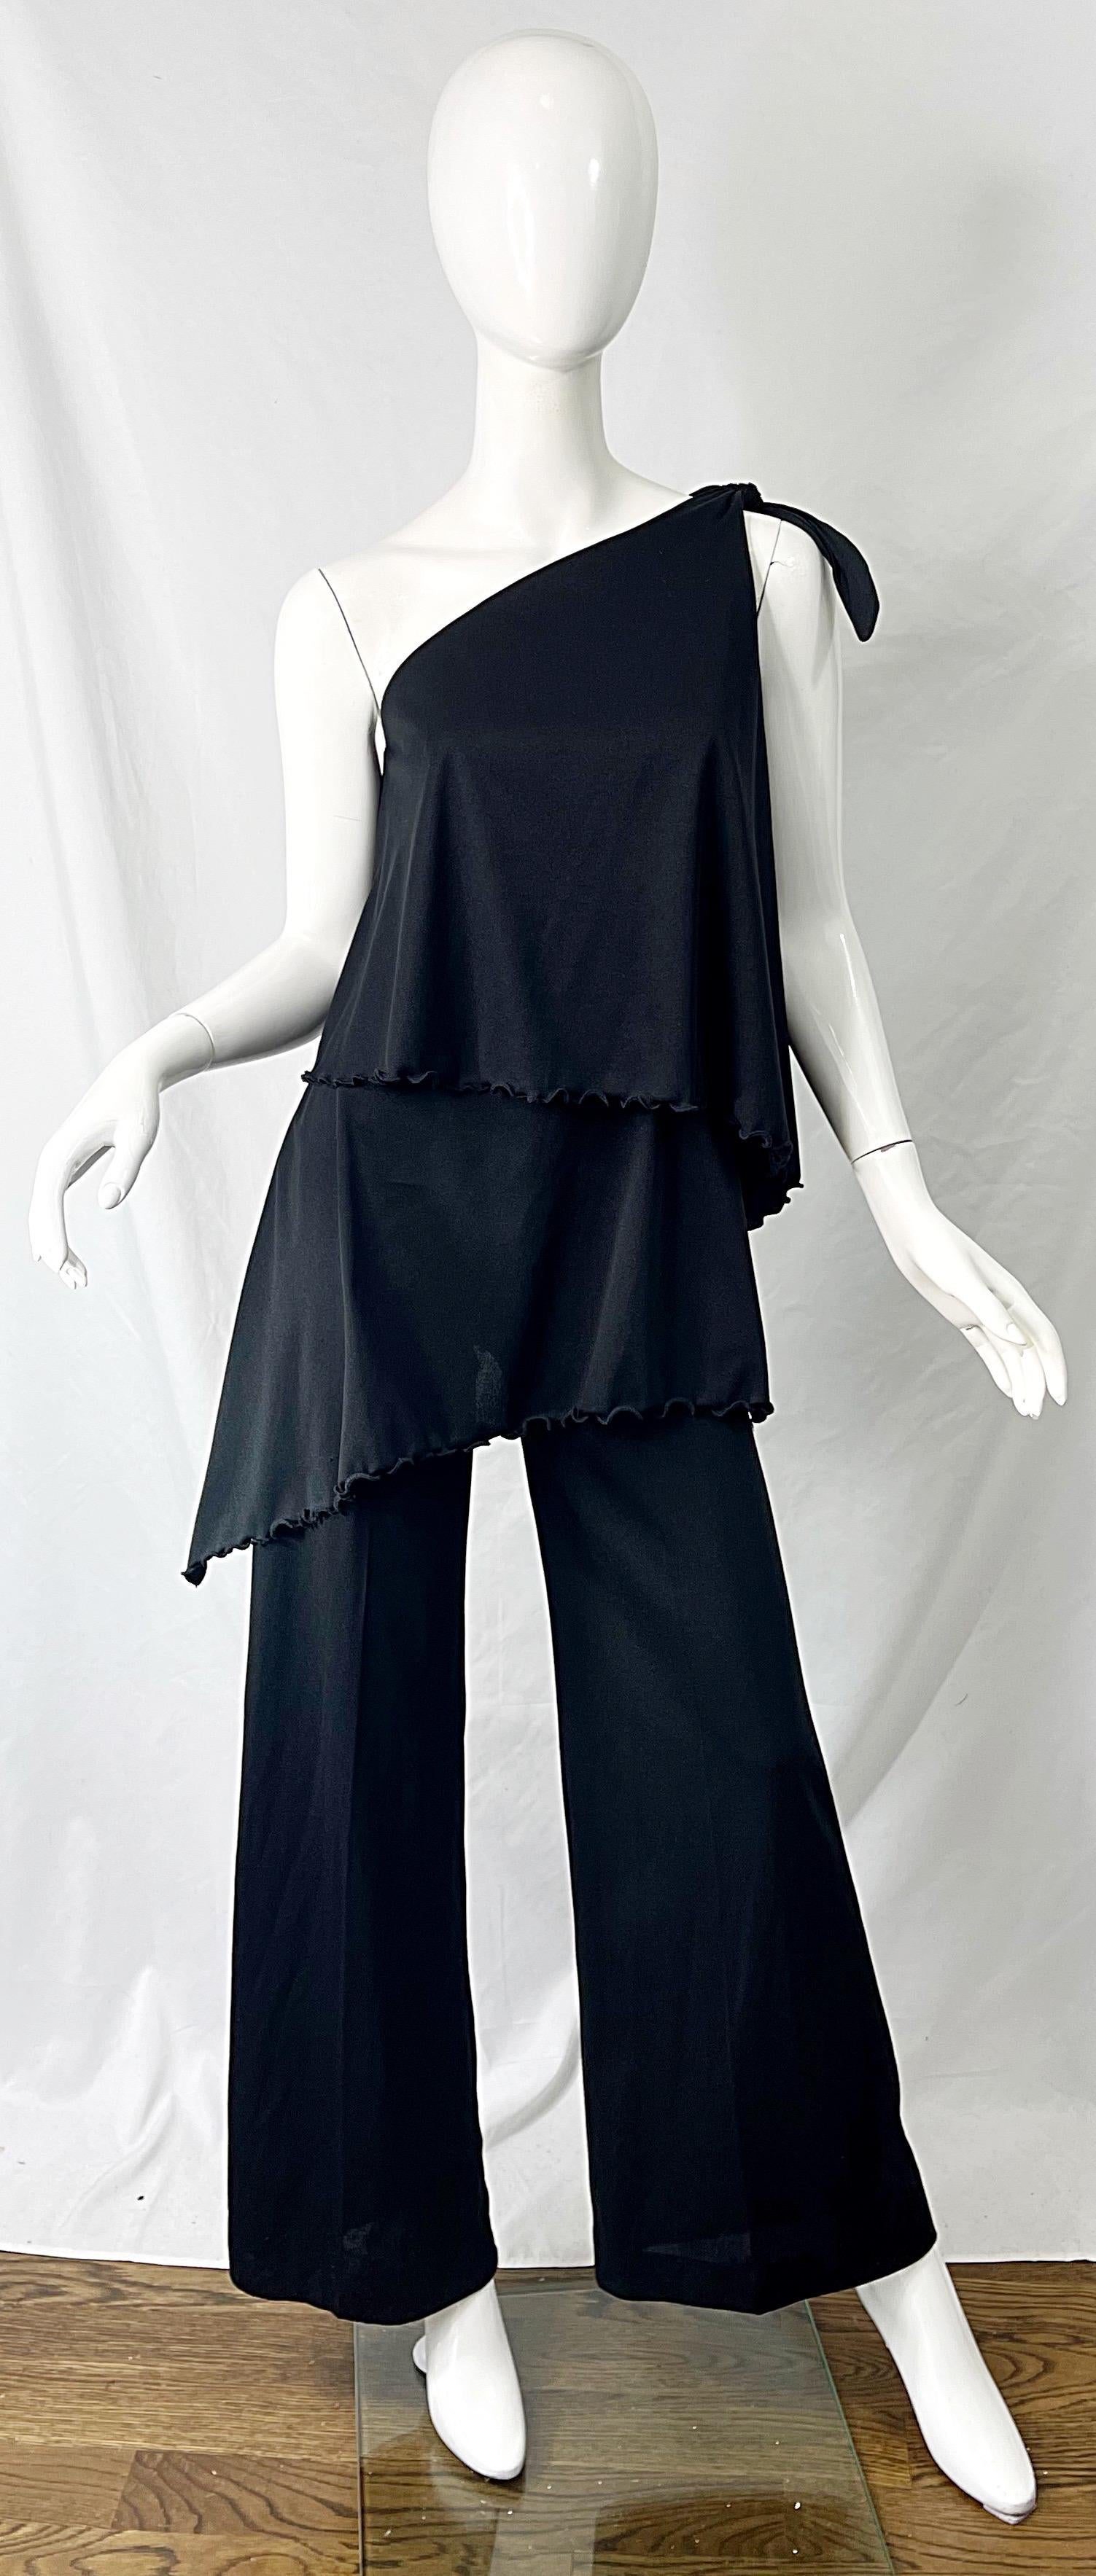 Chic 1970s one shoulder black jersey disco jumpsuit ! Features a tailored bodice with a tie at top left shoulder. Hidden zipper up the back with hook-and-eye closure. Flattering wide legs. Perfect for any day or evening event.
In great condition